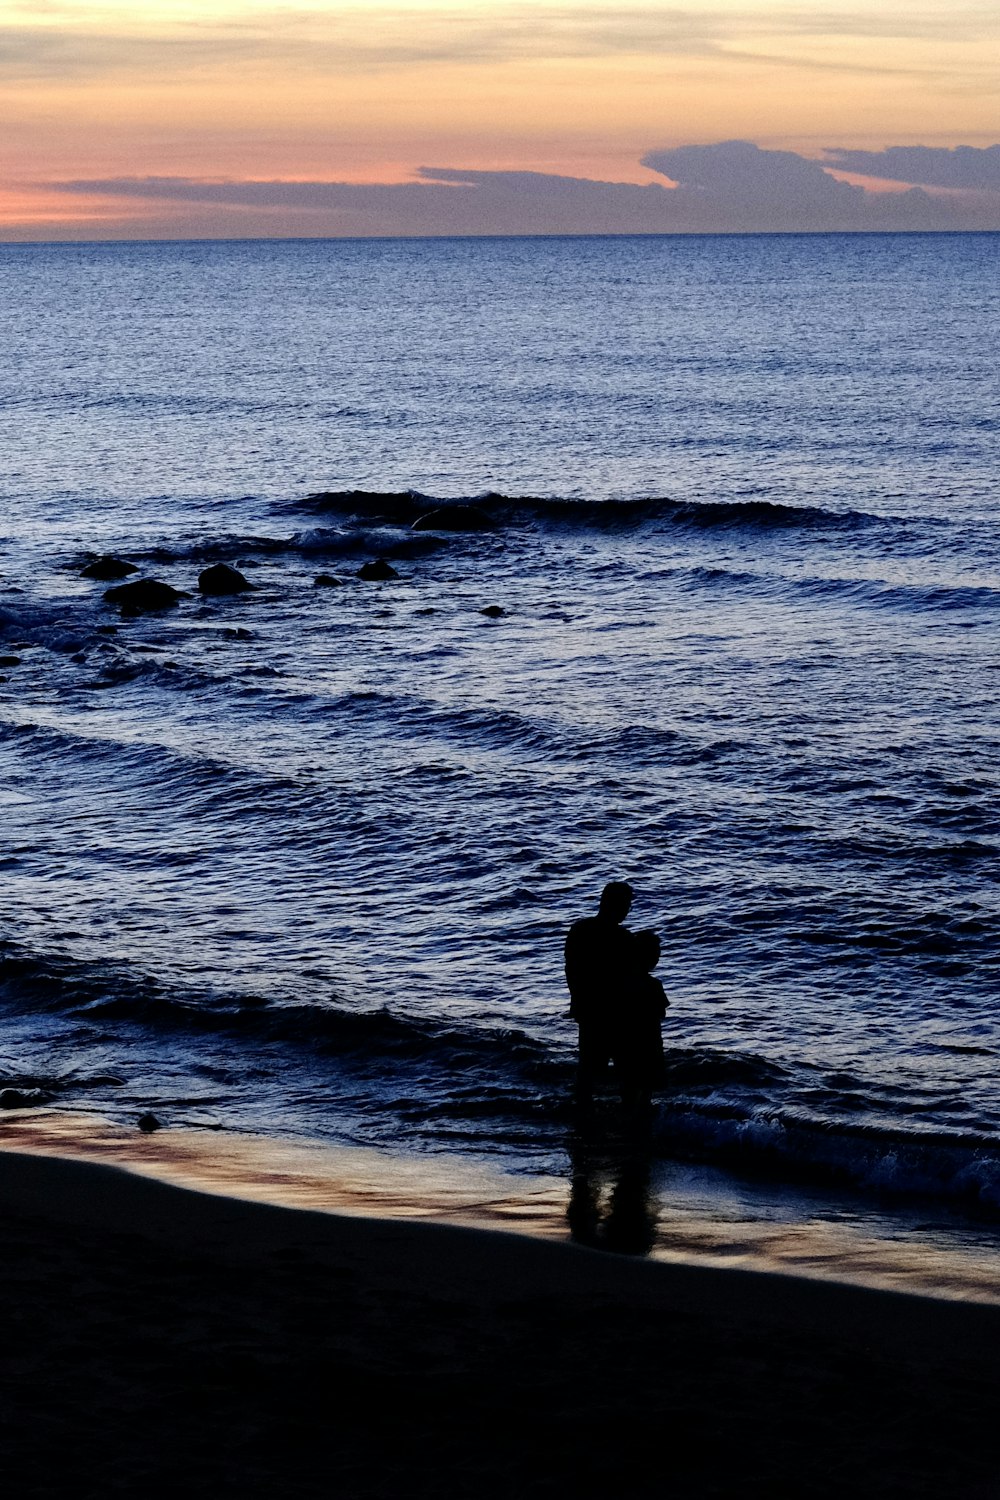 a man standing on a beach next to the ocean